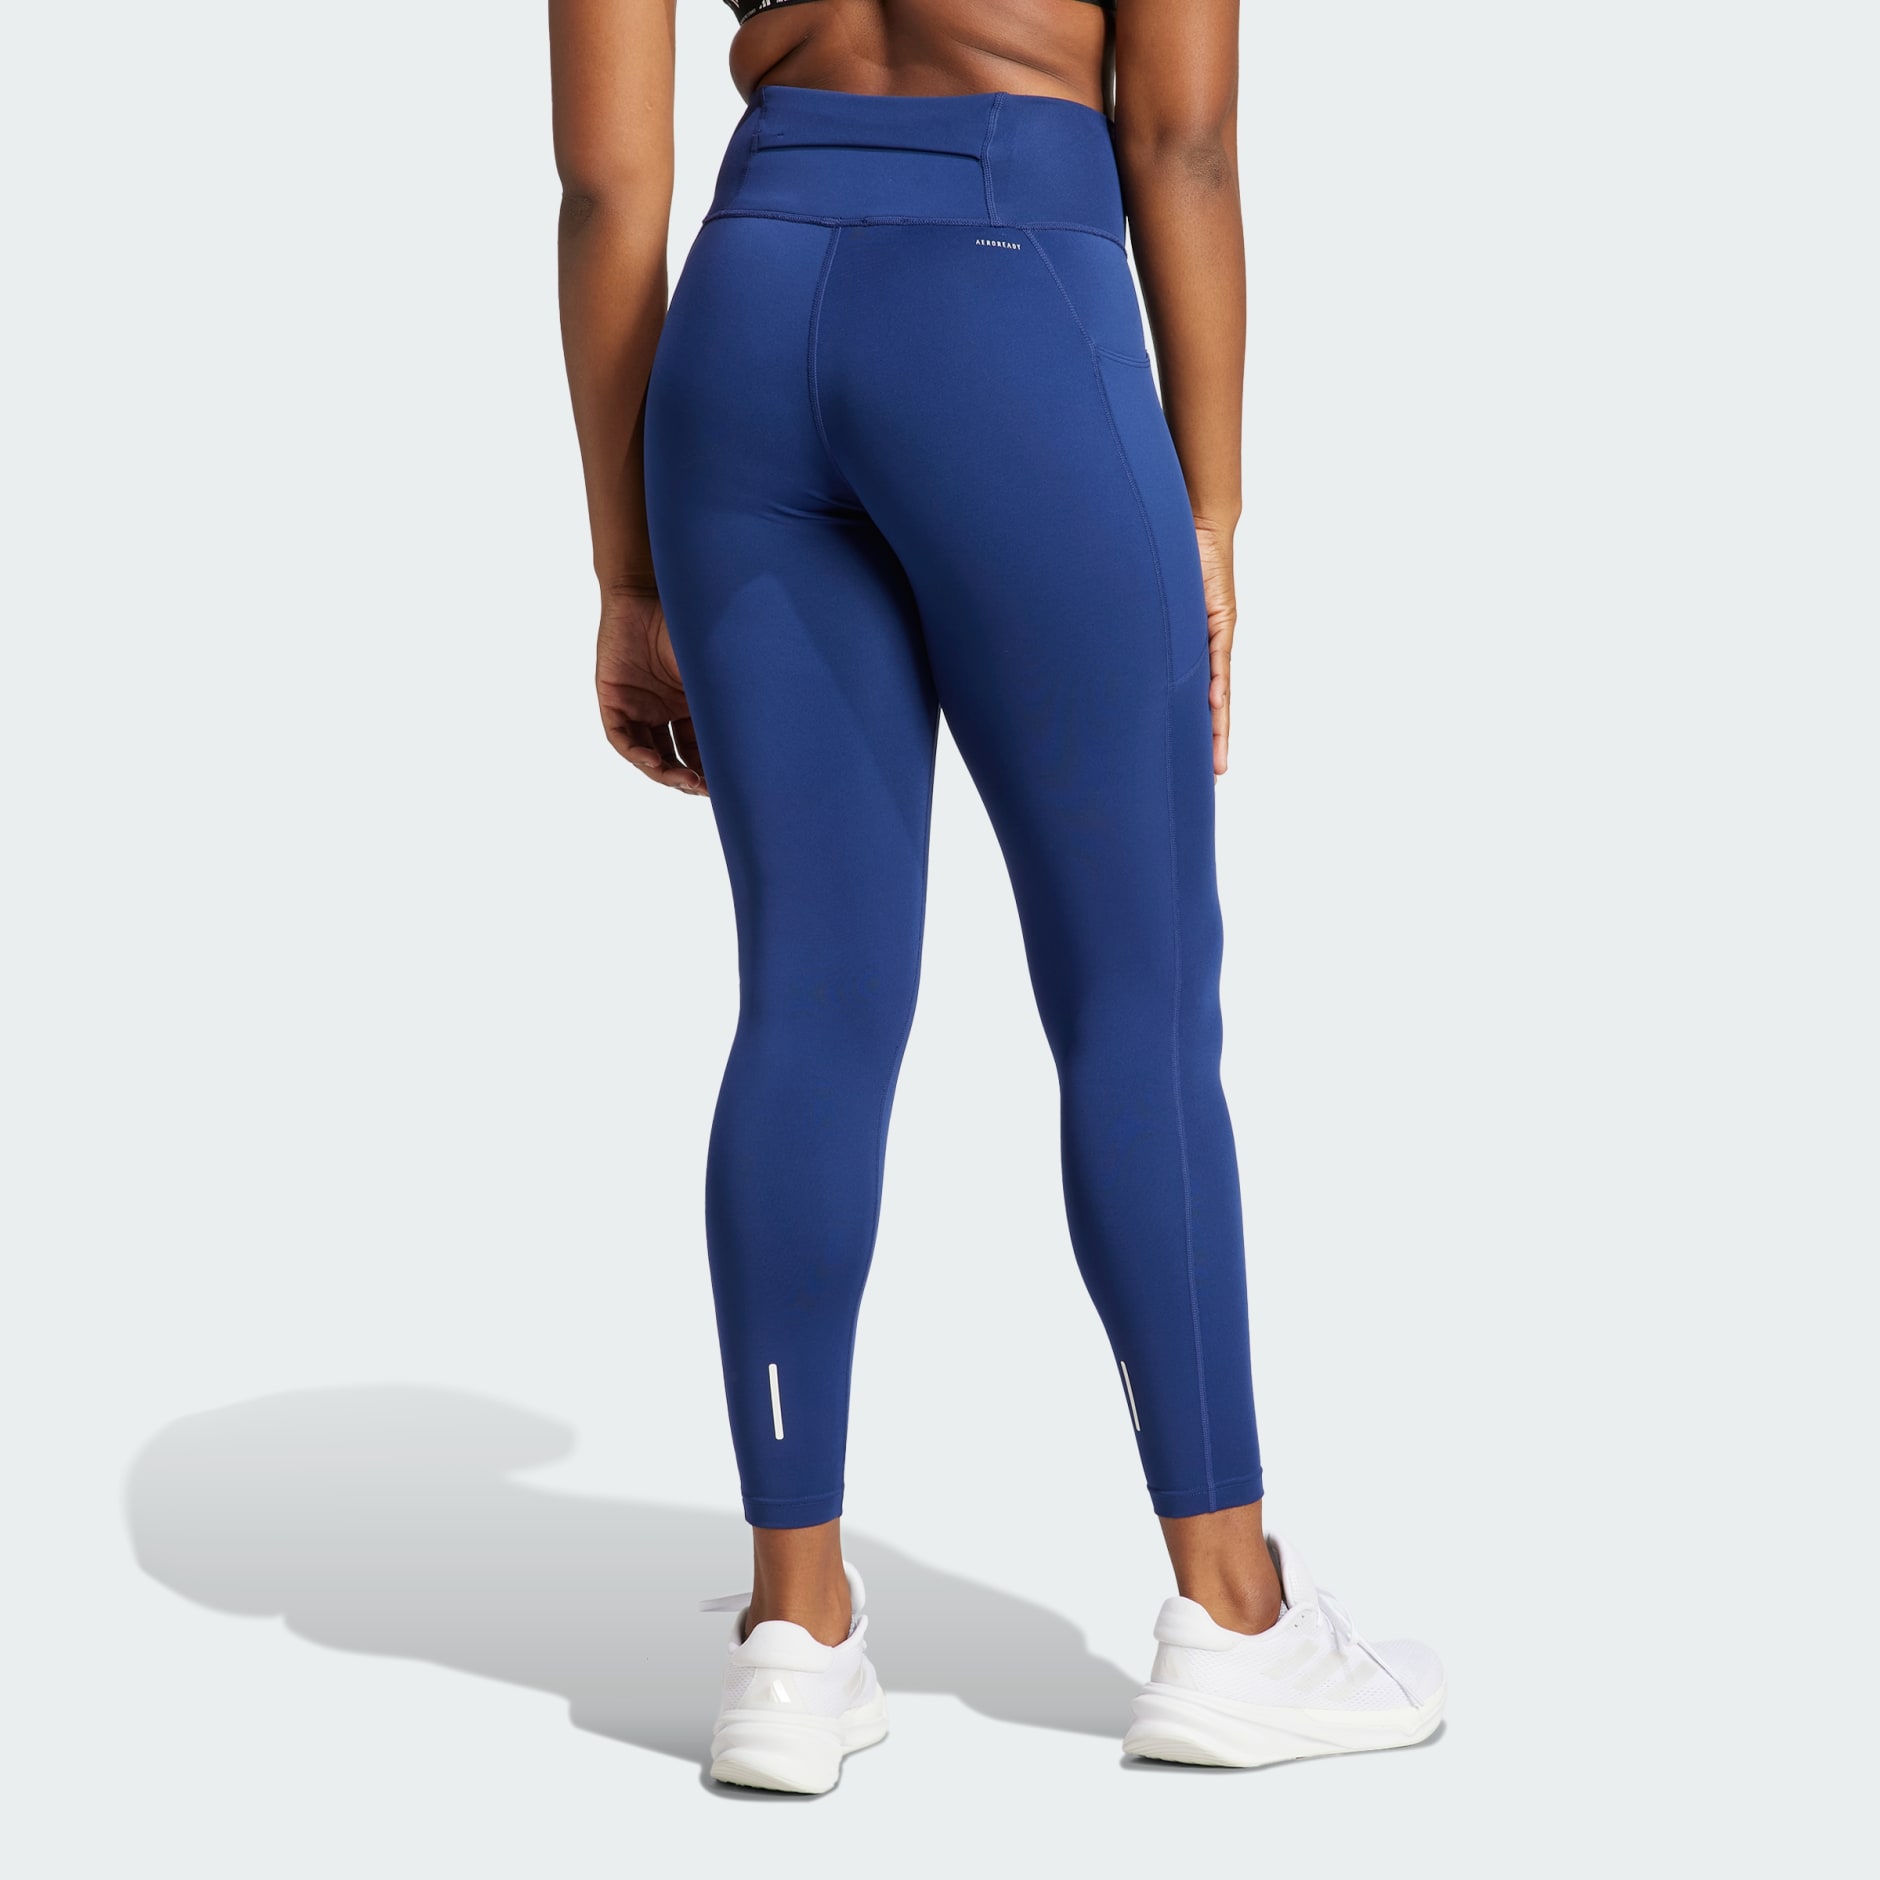 Women's High Waisted Everyday Active 7/8 Leggings - A New Day™ Light Blue L